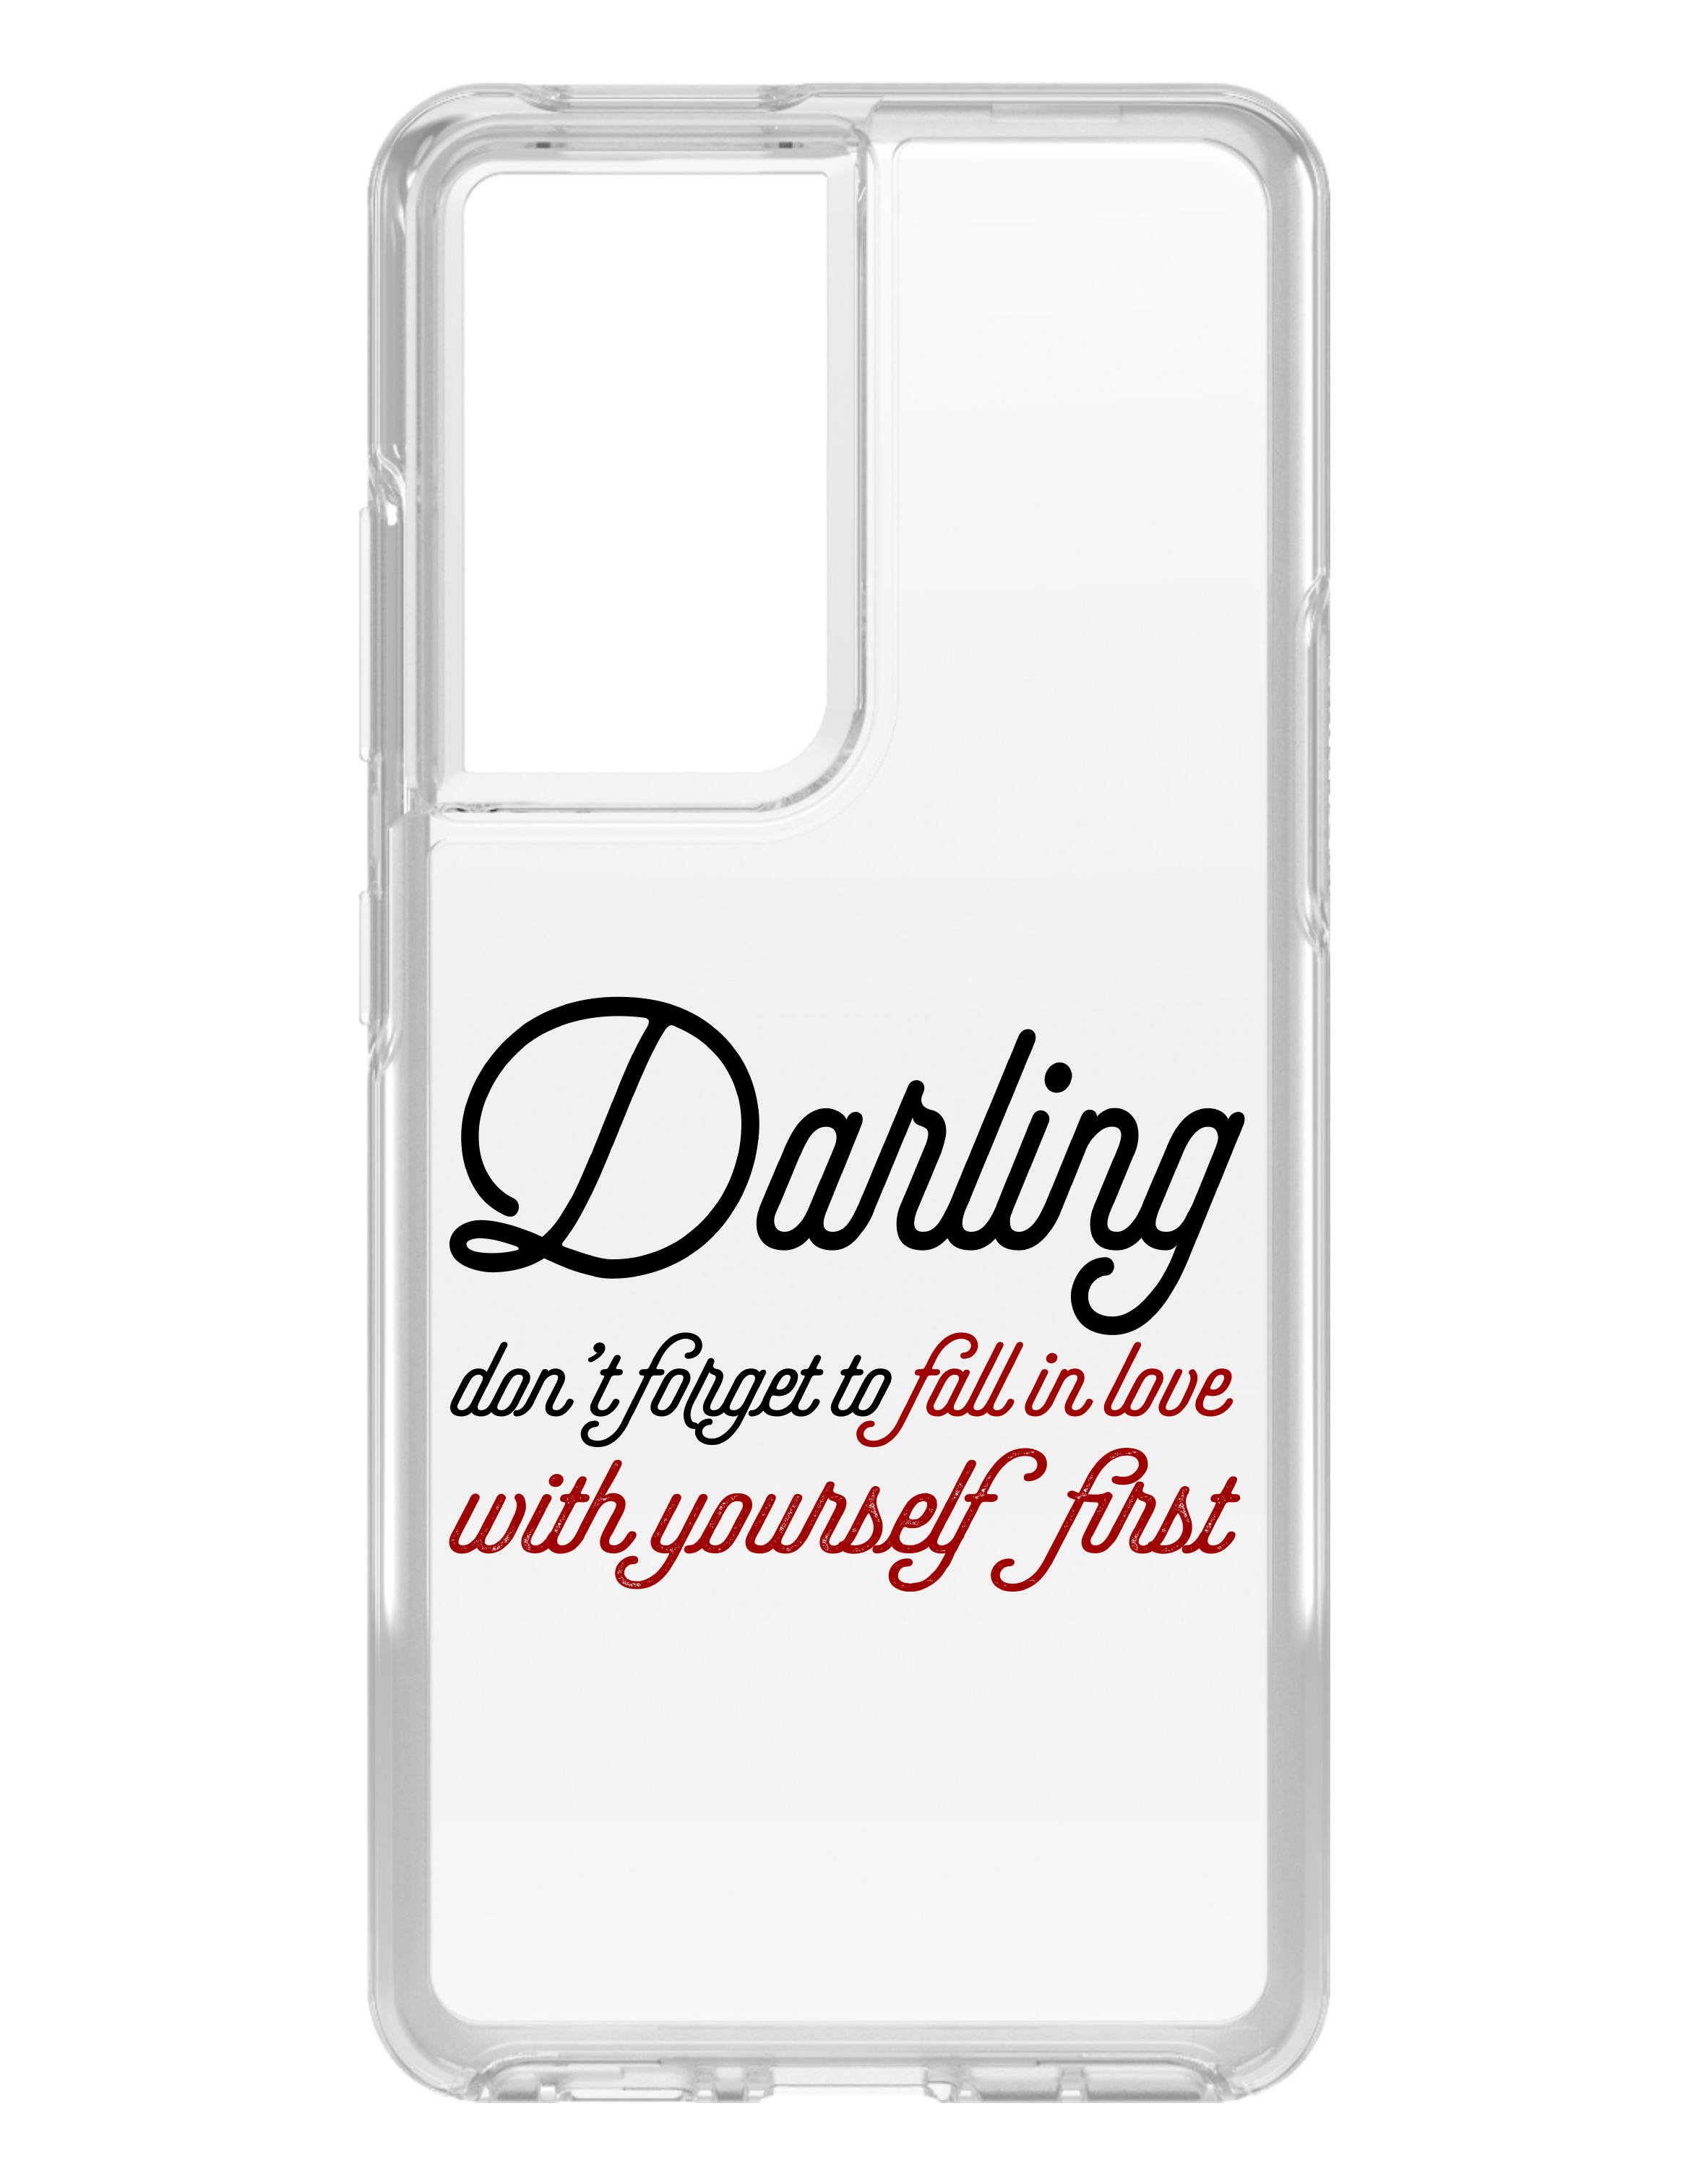 DistinctInk Clear Shockproof Hybrid Case for Galaxy S21 ULTRA 5G (6.8" Screen) - TPU Bumper Acrylic Back Tempered Glass Screen Protector - Darling Don't Forget to Fall In Love with Yourself - image 1 of 2